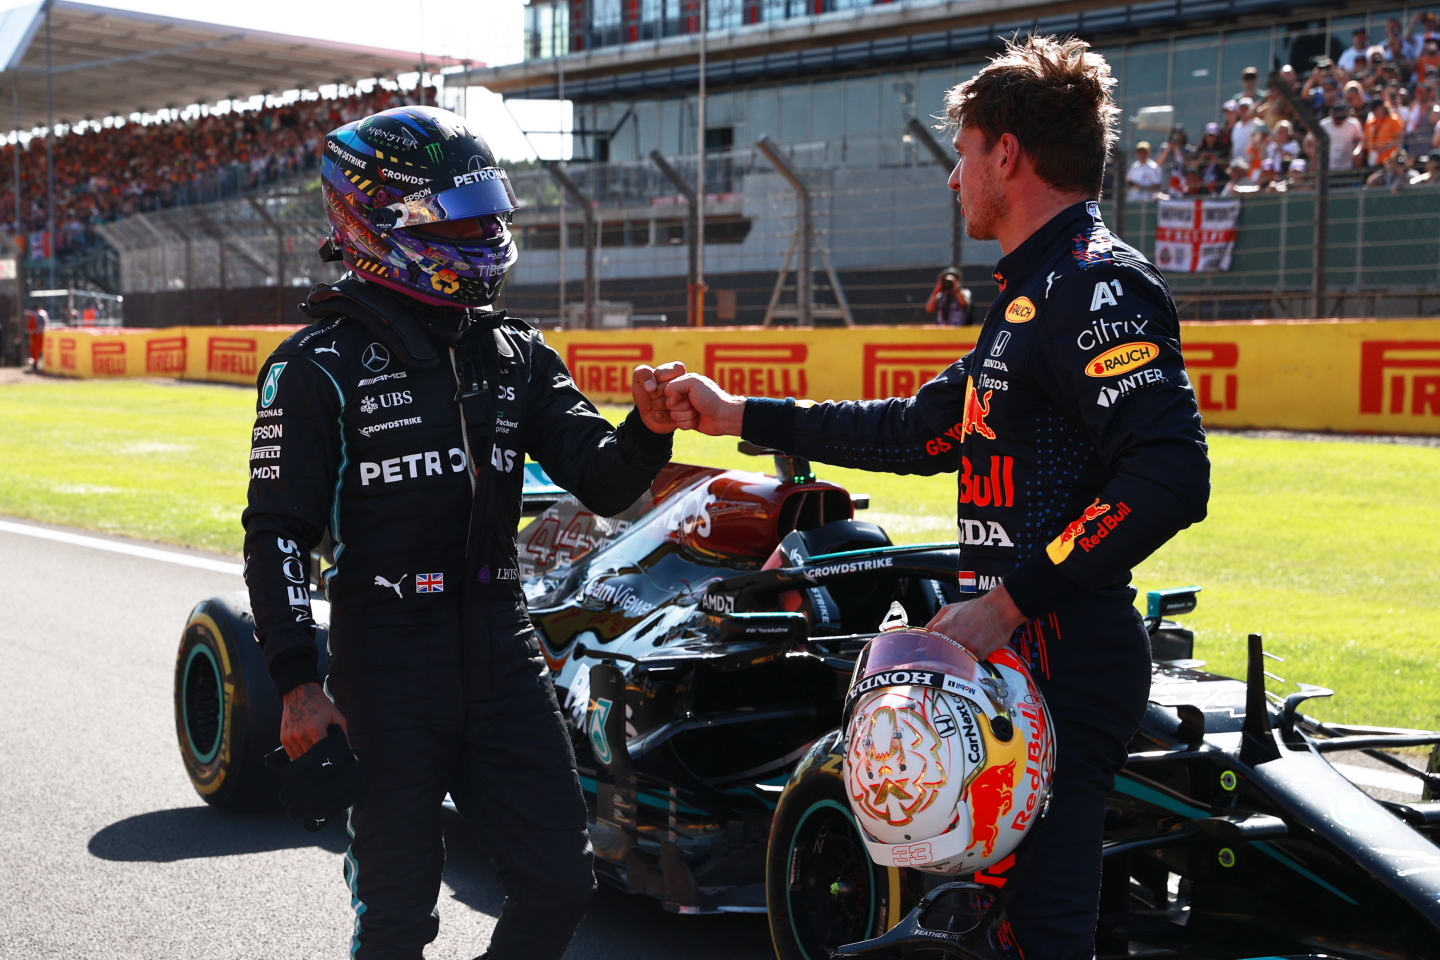 NORTHAMPTON, ENGLAND - JULY 17: Winner Max Verstappen of Netherlands and Red Bull Racing and second placed Lewis Hamilton of Great Britain and Mercedes GP bump fists in parc ferme during the Sprint for the F1 Grand Prix of Great Britain at Silverstone on July 17, 2021 in Northampton, England. (Photo by Mark Thompson/Getty Images)